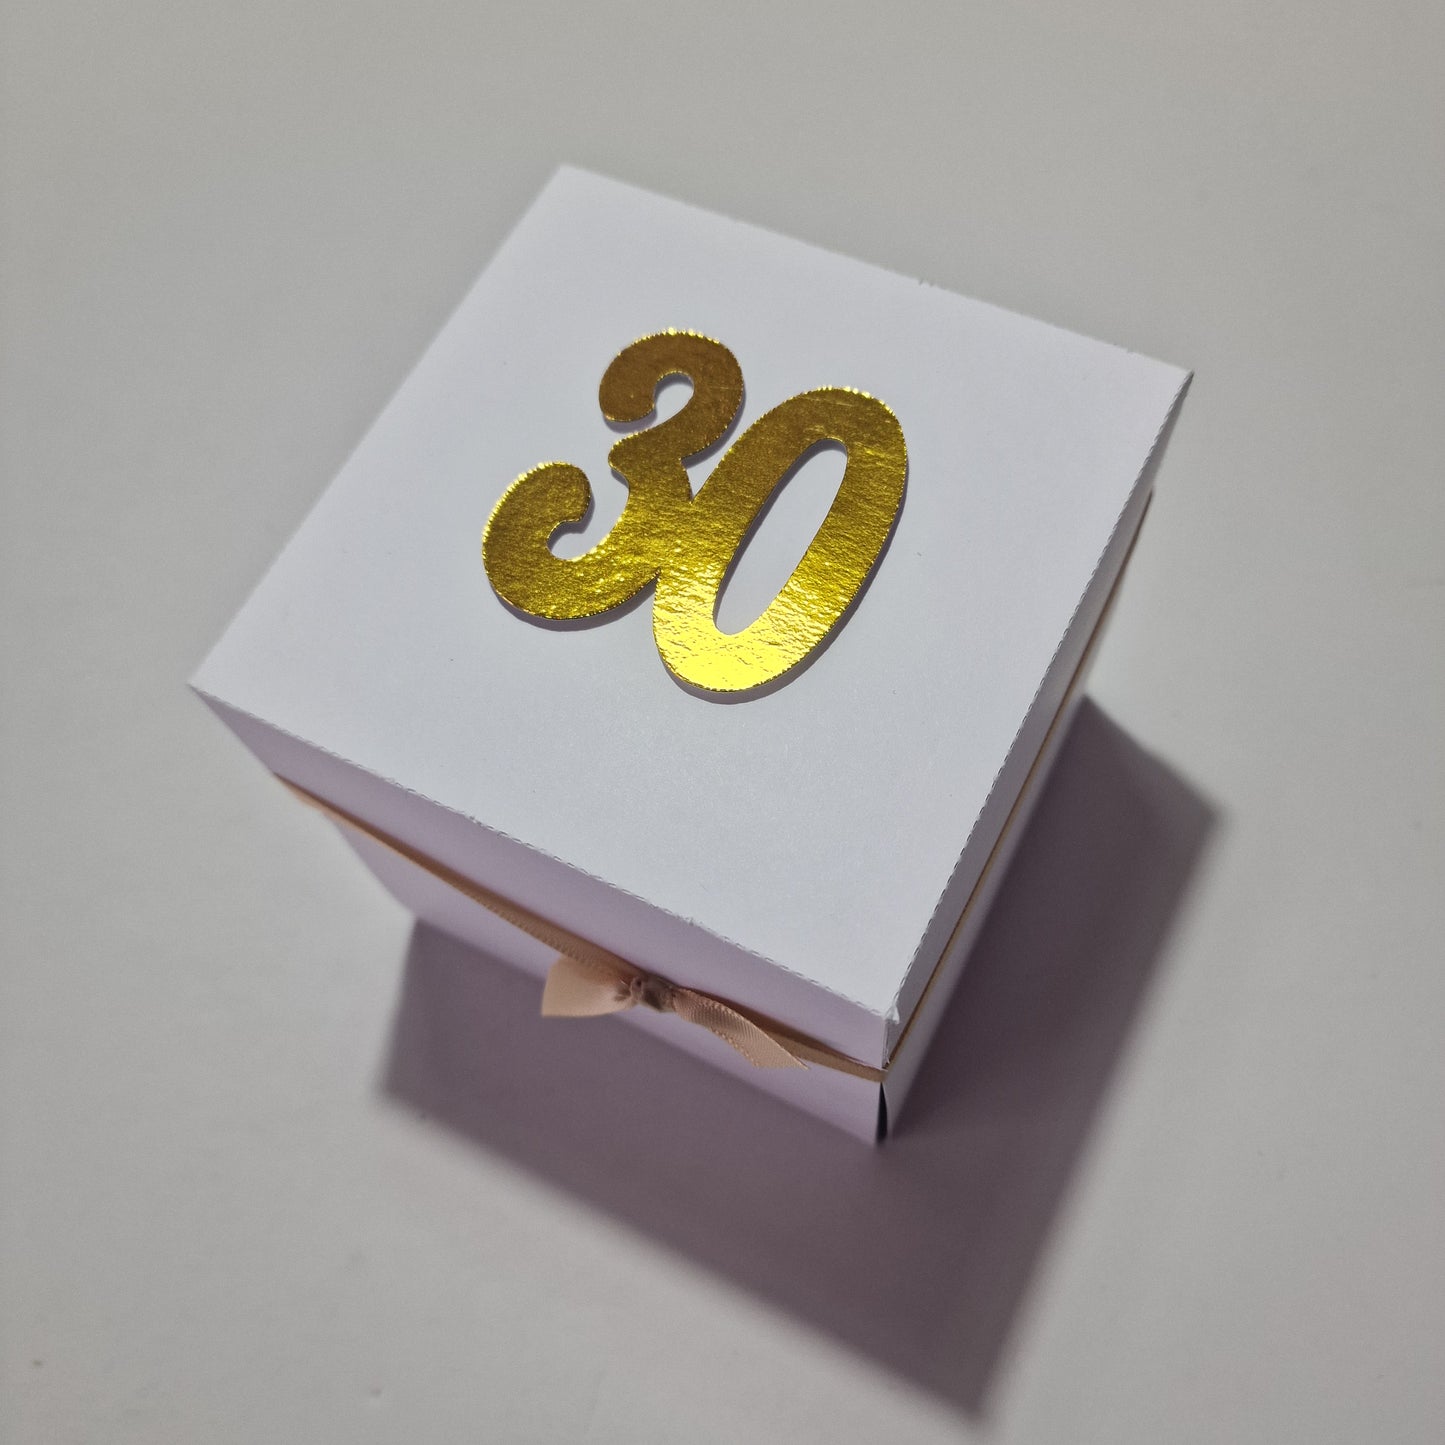 White BOx with 30 on the lid